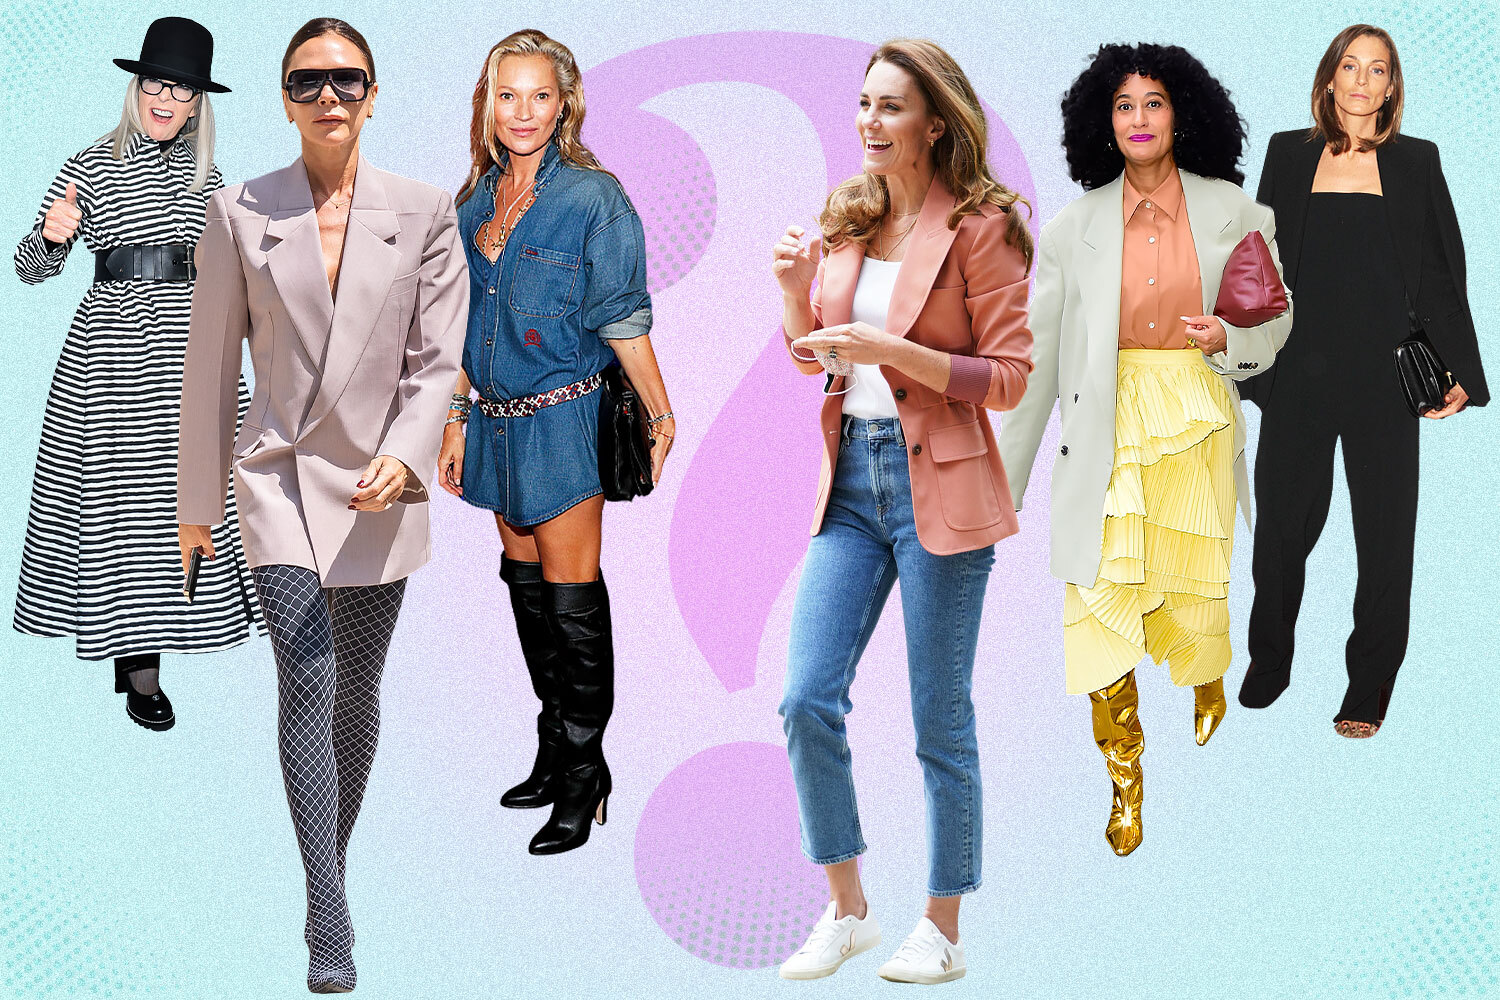 Diane Keaton, Victoria Beckham, Kate Moss, the Princess of Wales, Tracee-Ellis Ross or Phoebe Philo: which celebrity style inspires you most?